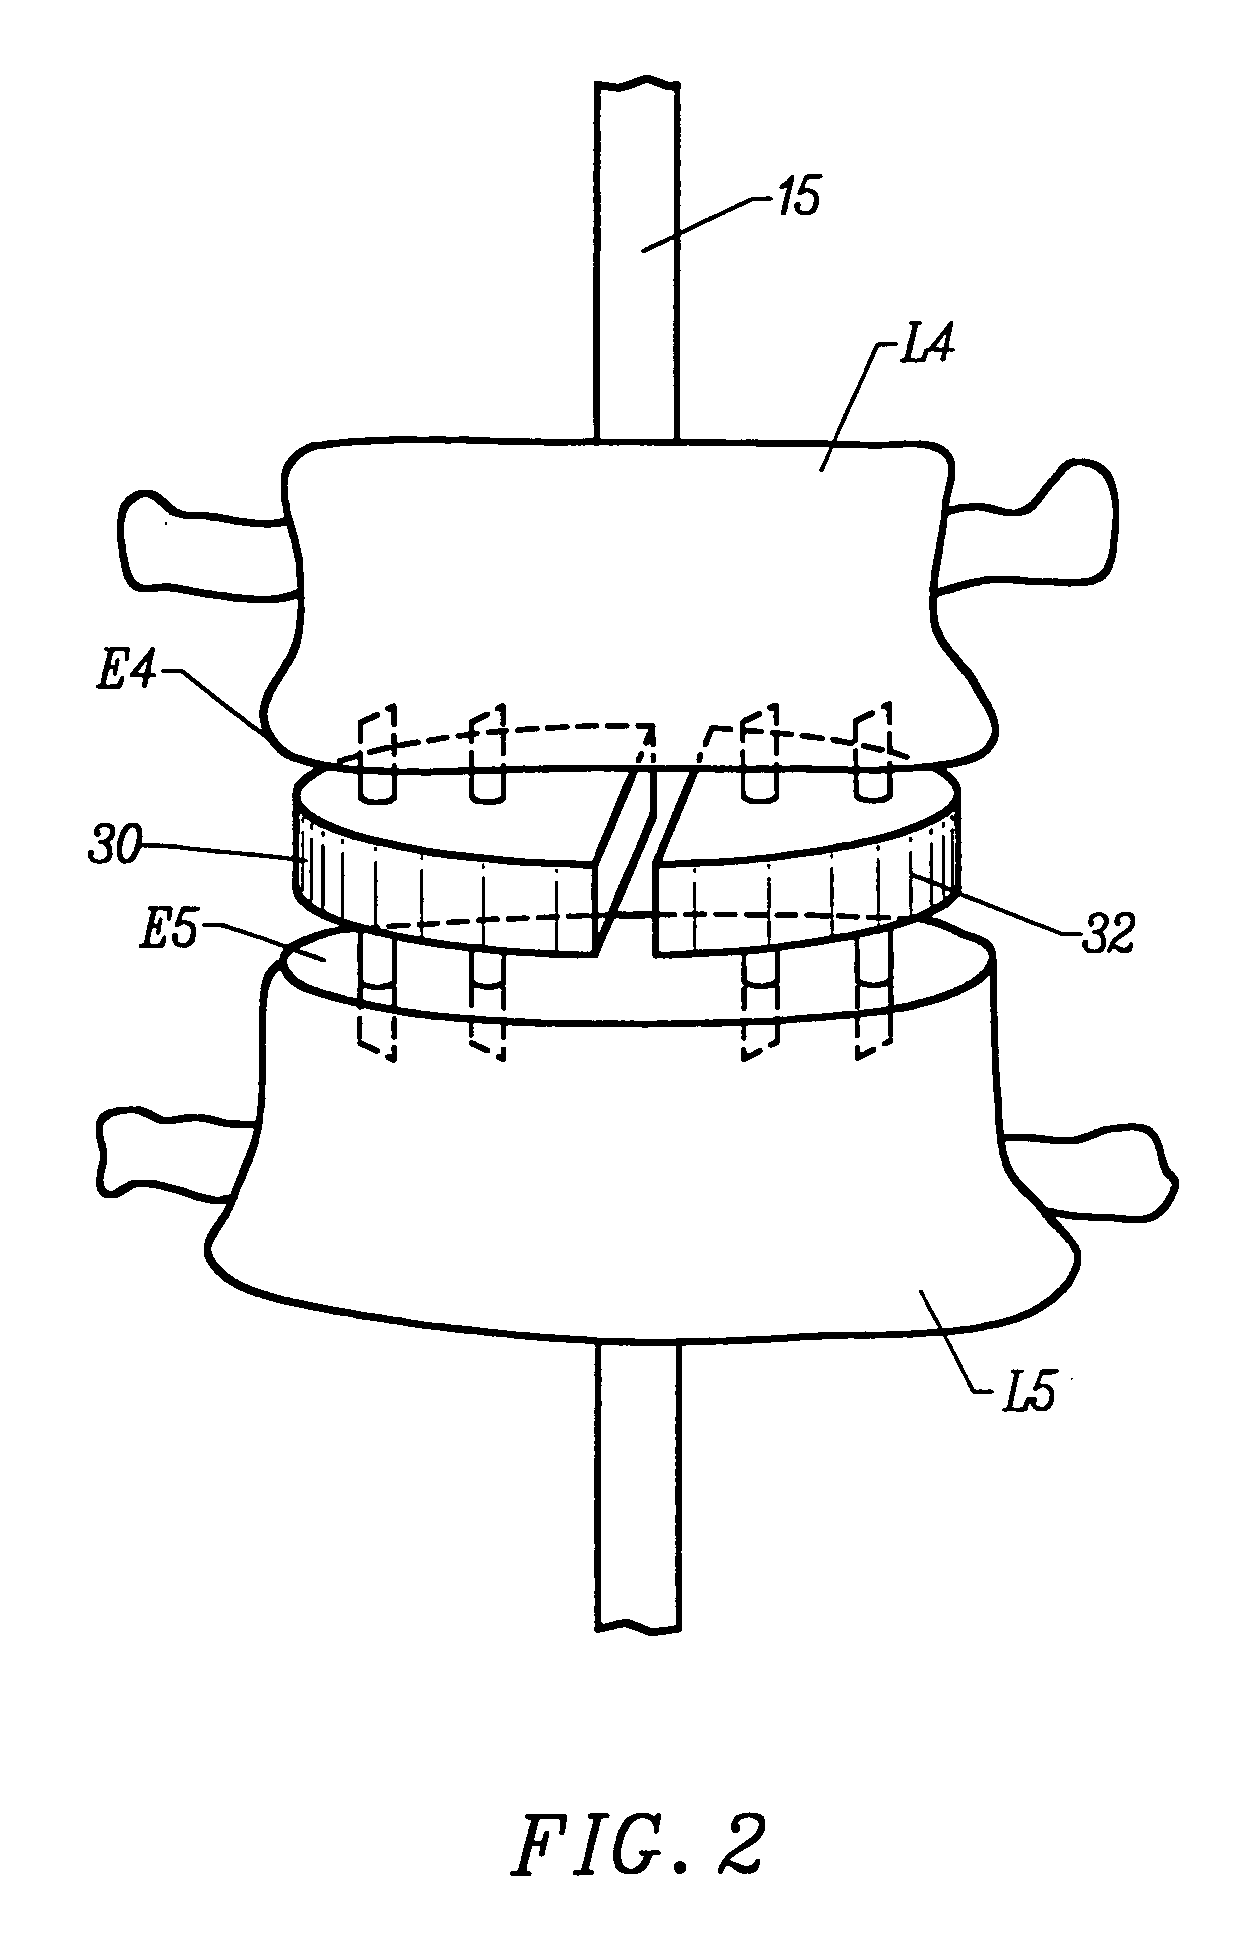 Method and apparatus for intervertebral implant anchorage